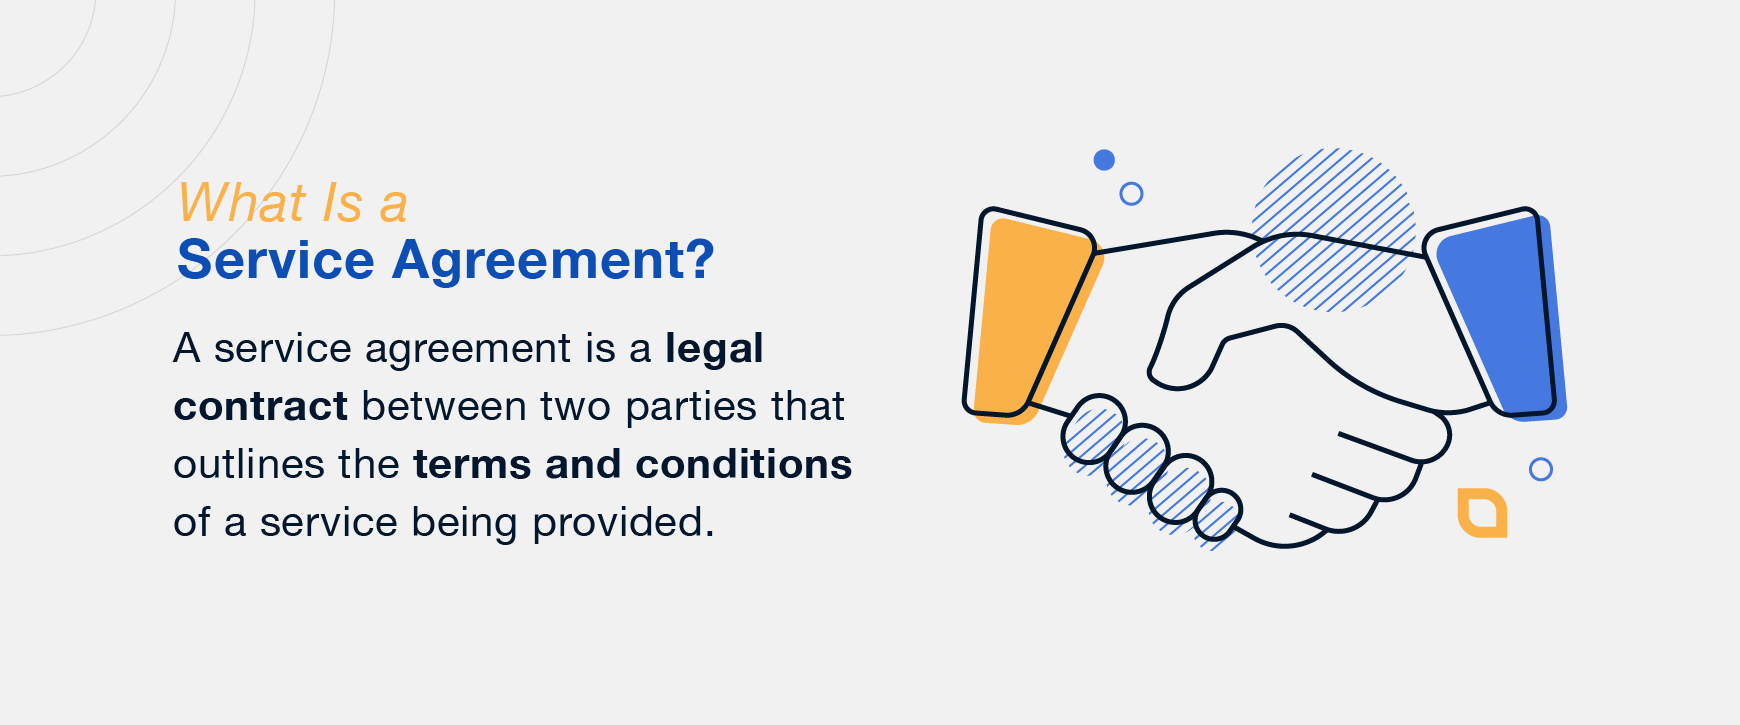 Definition of a service agreement